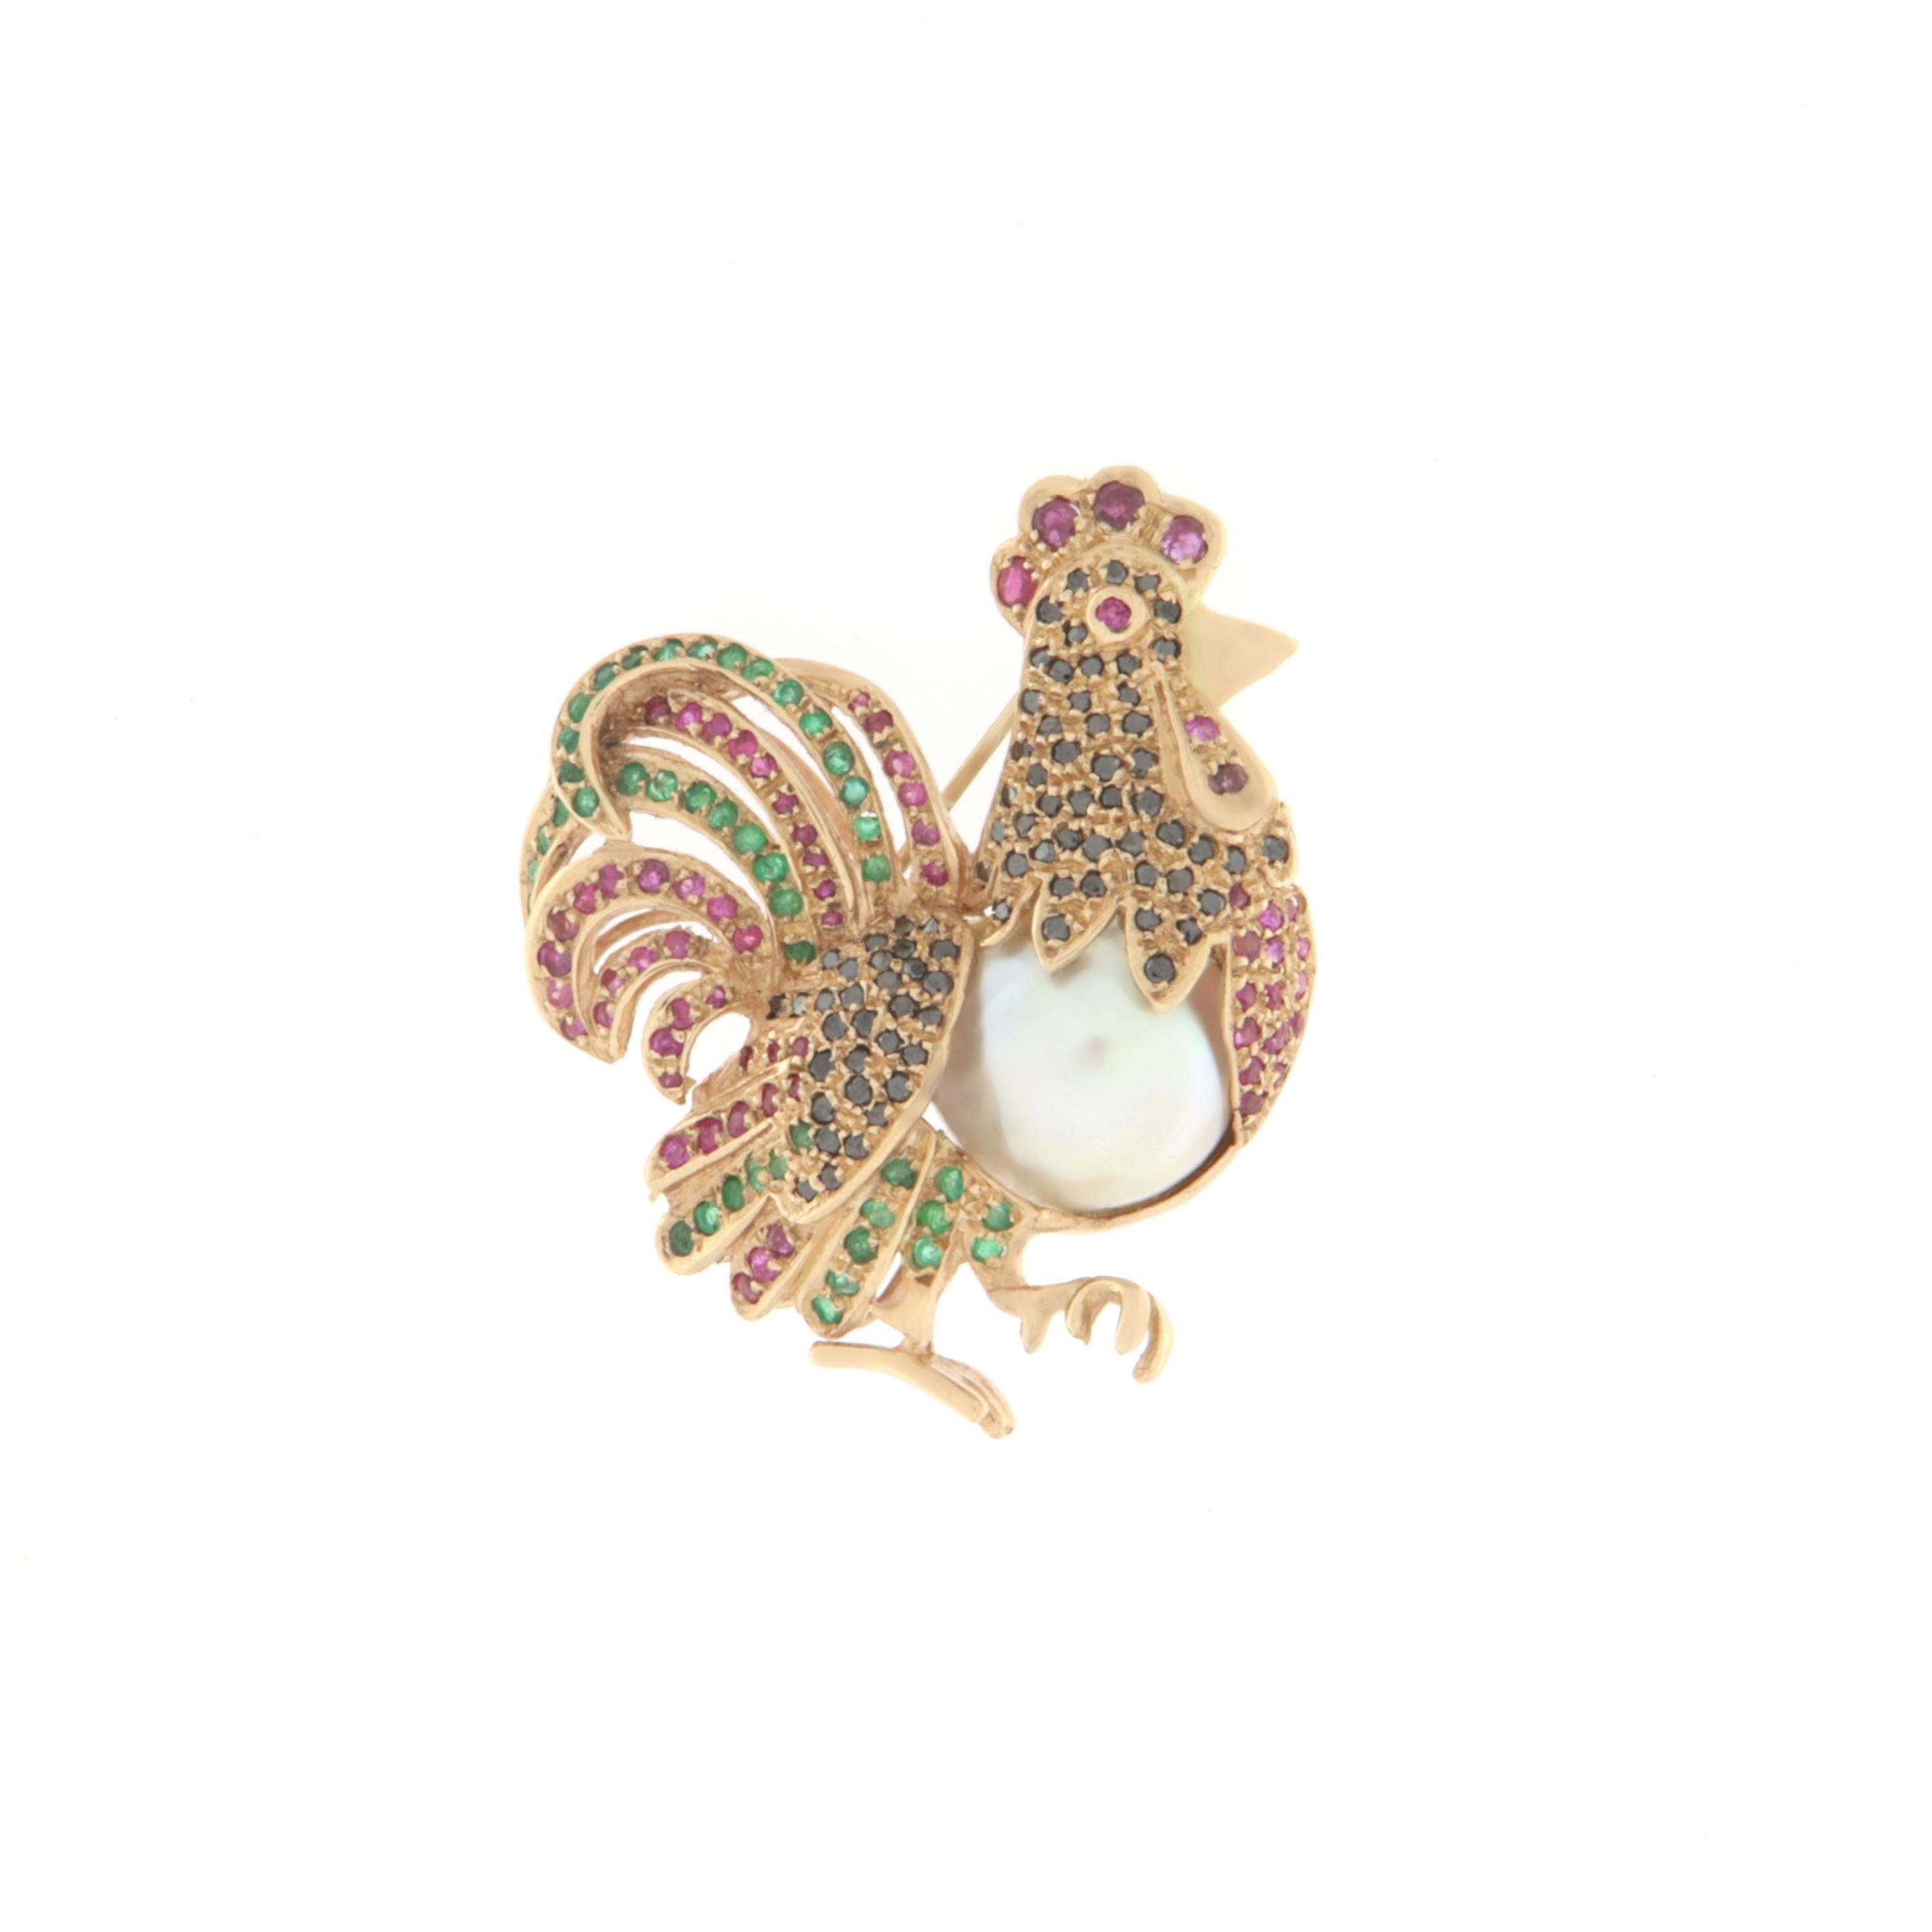 Magnificent rooster to wear for special events in 14 karat yellow gold mounted with rubies, emeralds, black diamonds and pearl

Pearl weight 5.50 grams
Emeralds and rubies weight 2.08 karat
Black Diamonds weight 0.80 karat
Brooch total weight 18.40